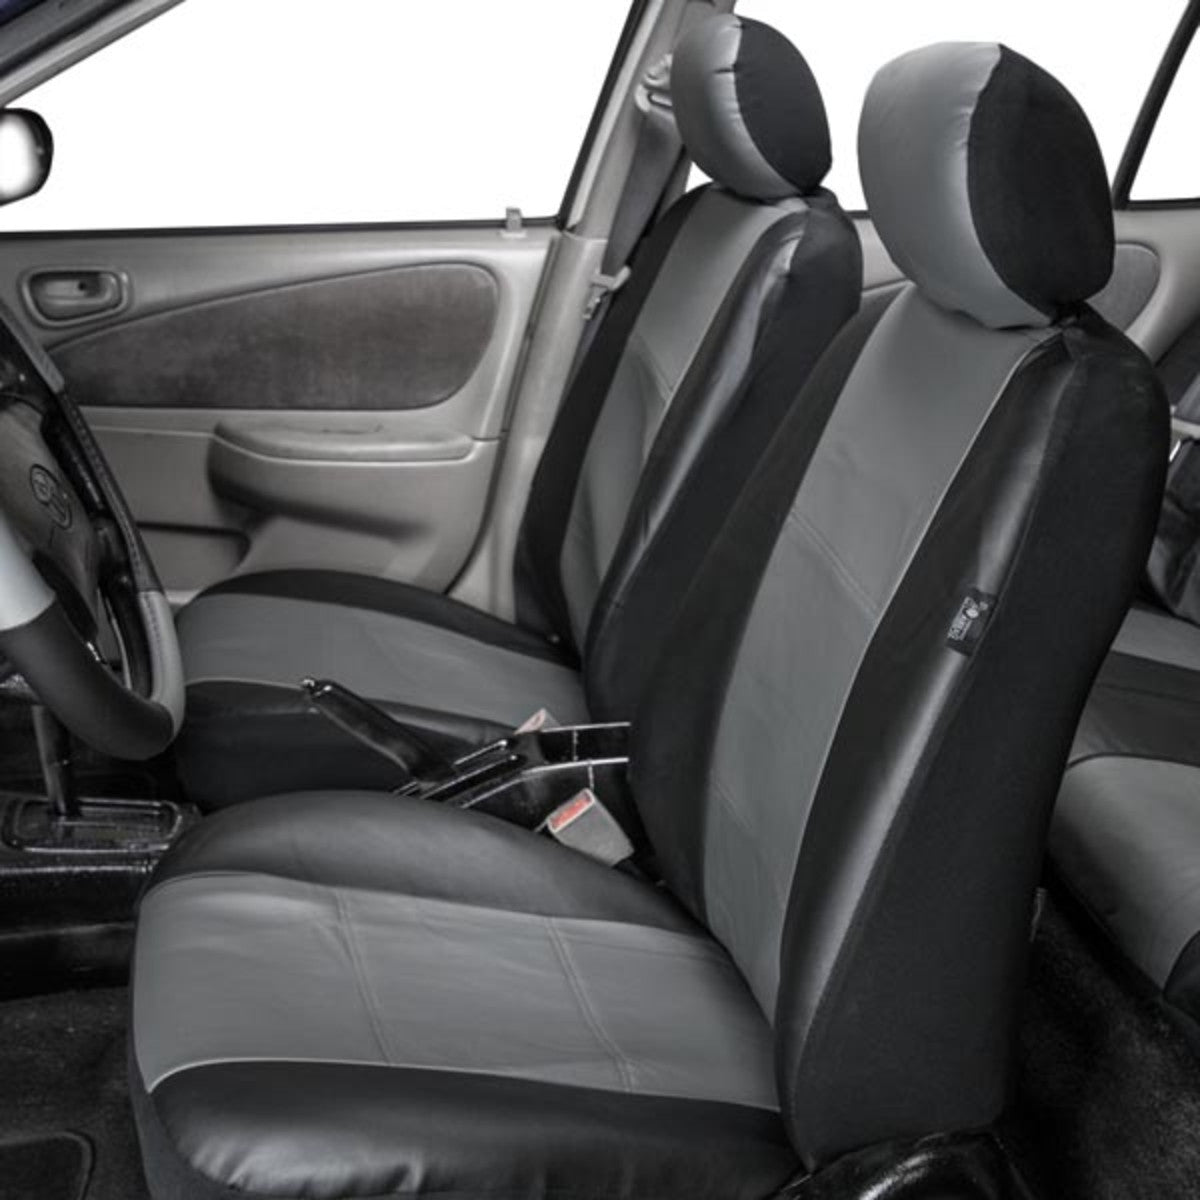 Premium PU Leather Seat Covers - Front Set Gray / Black